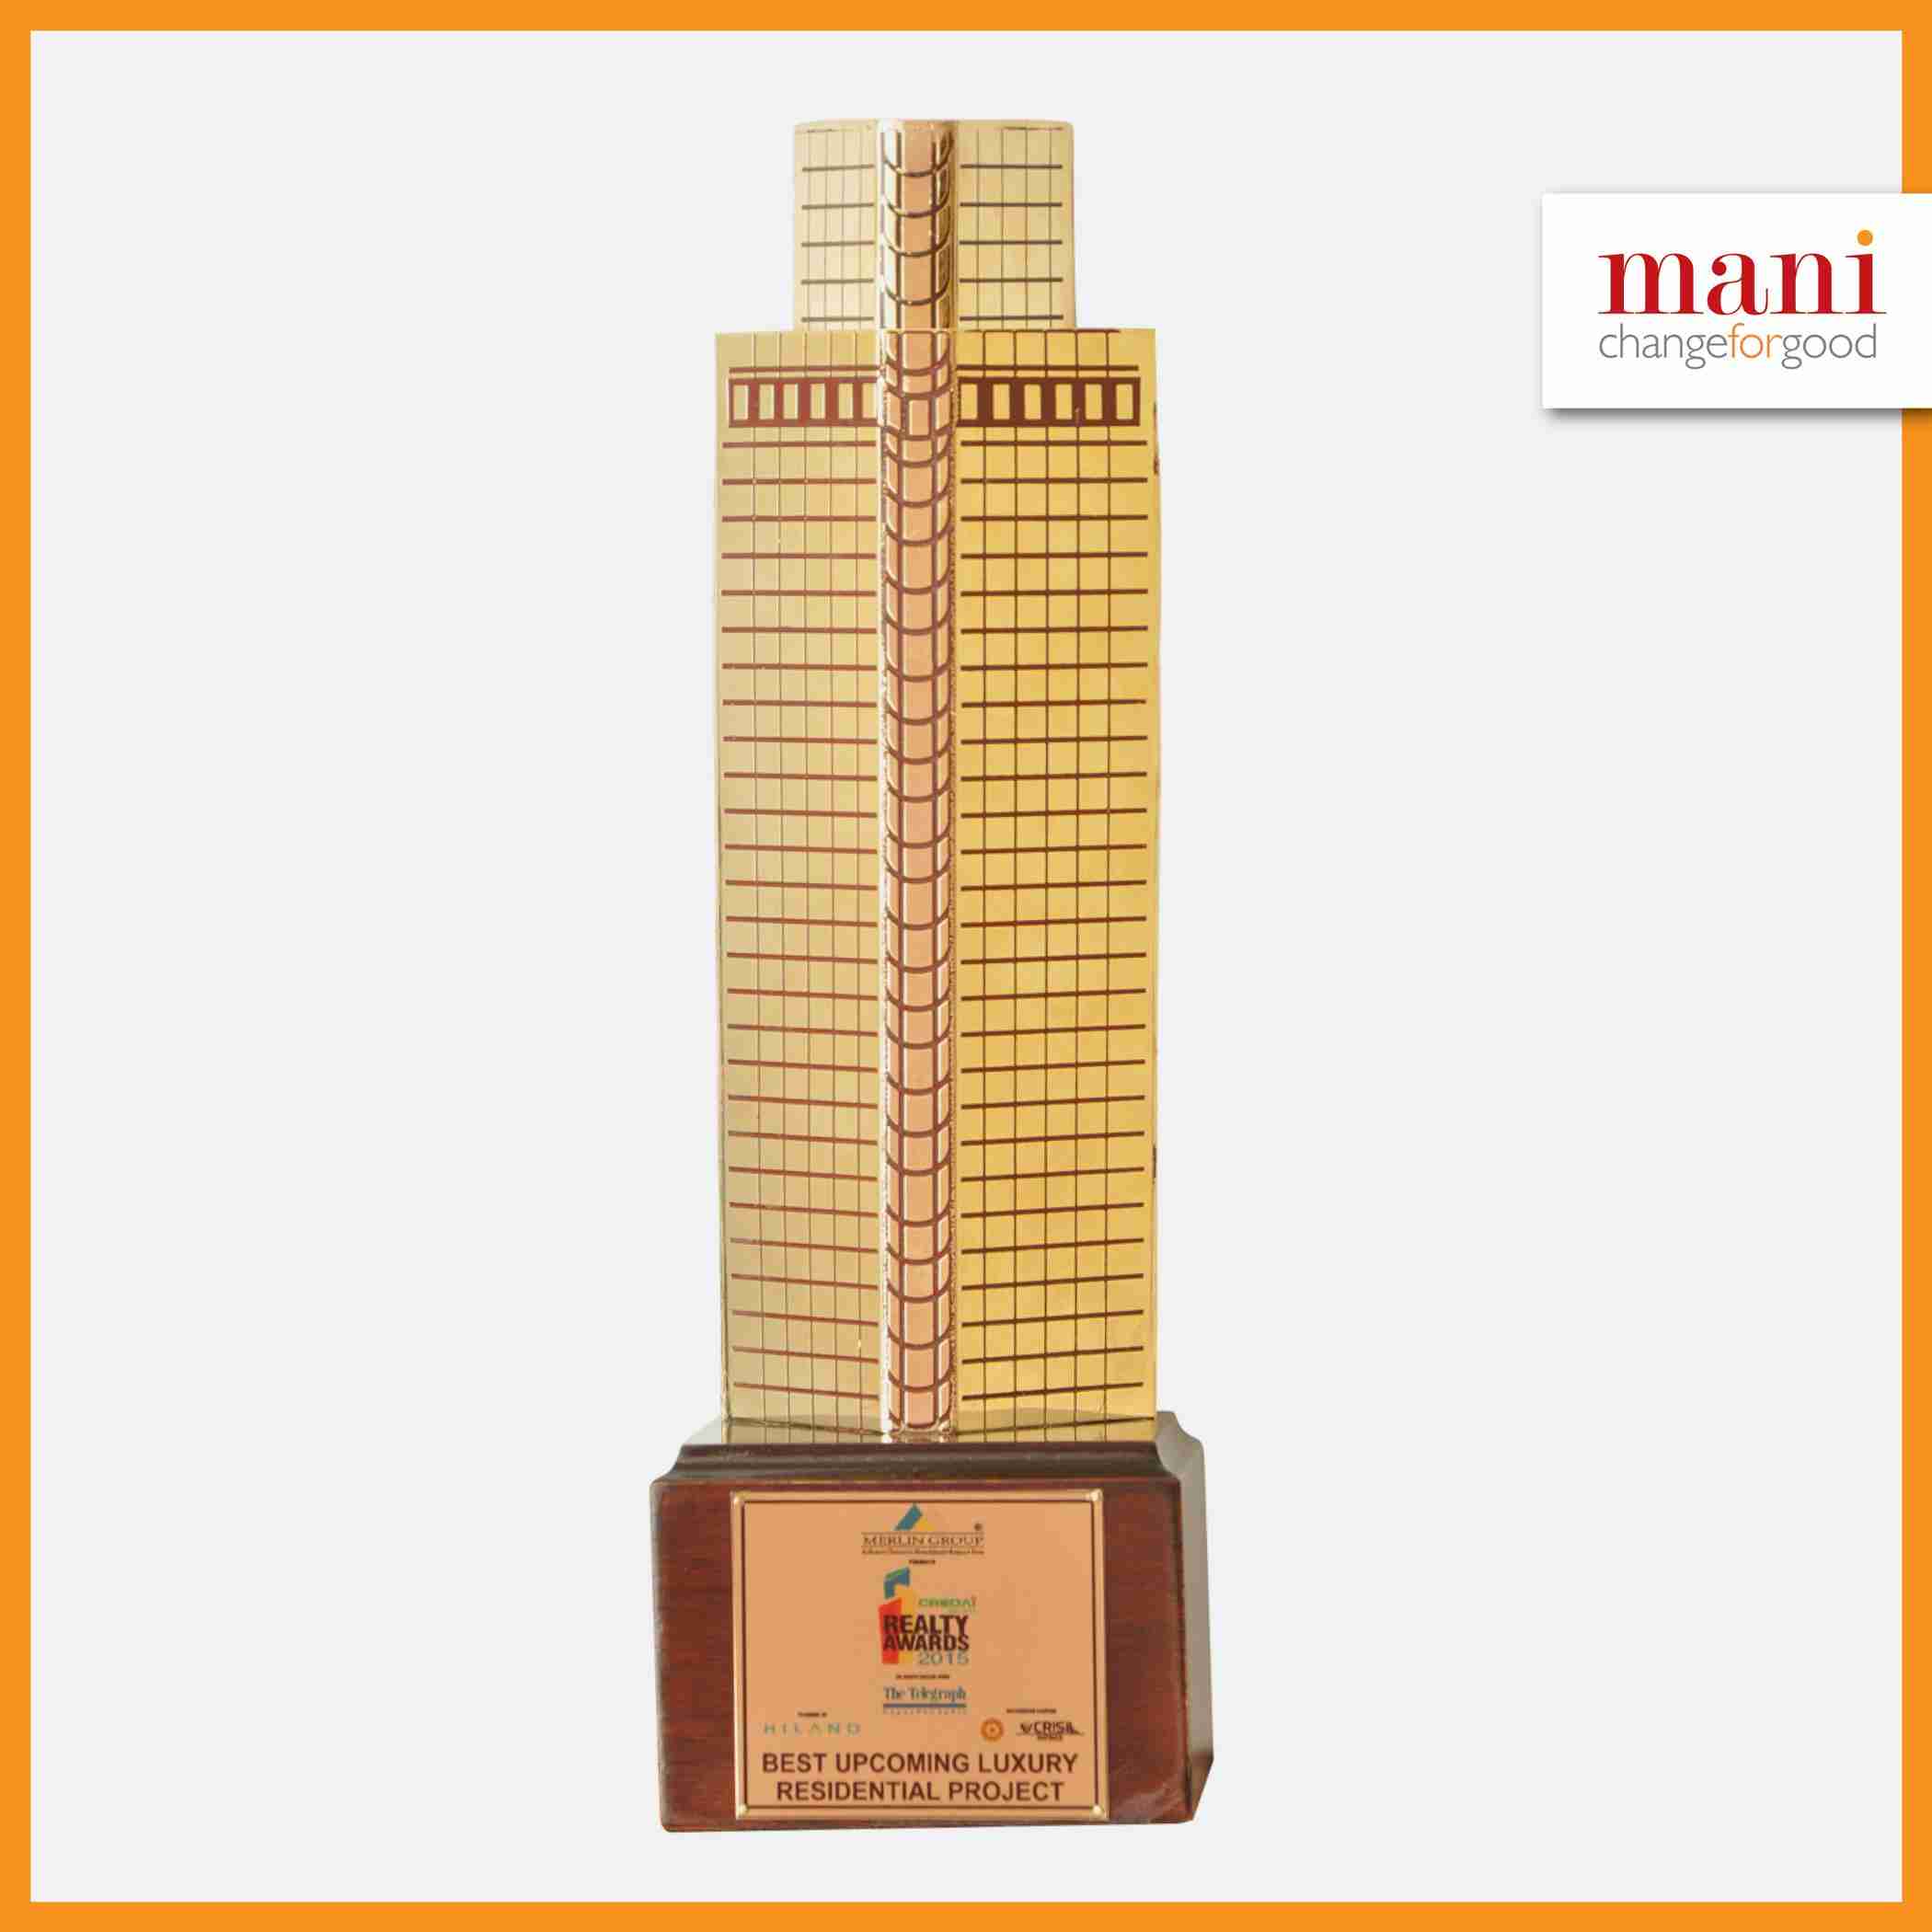 Tirumani awarded “Best Residential Project in the Ultra-Luxury Segment in Kolkata” at the 2014 CNBC AWAAZ AWARDS